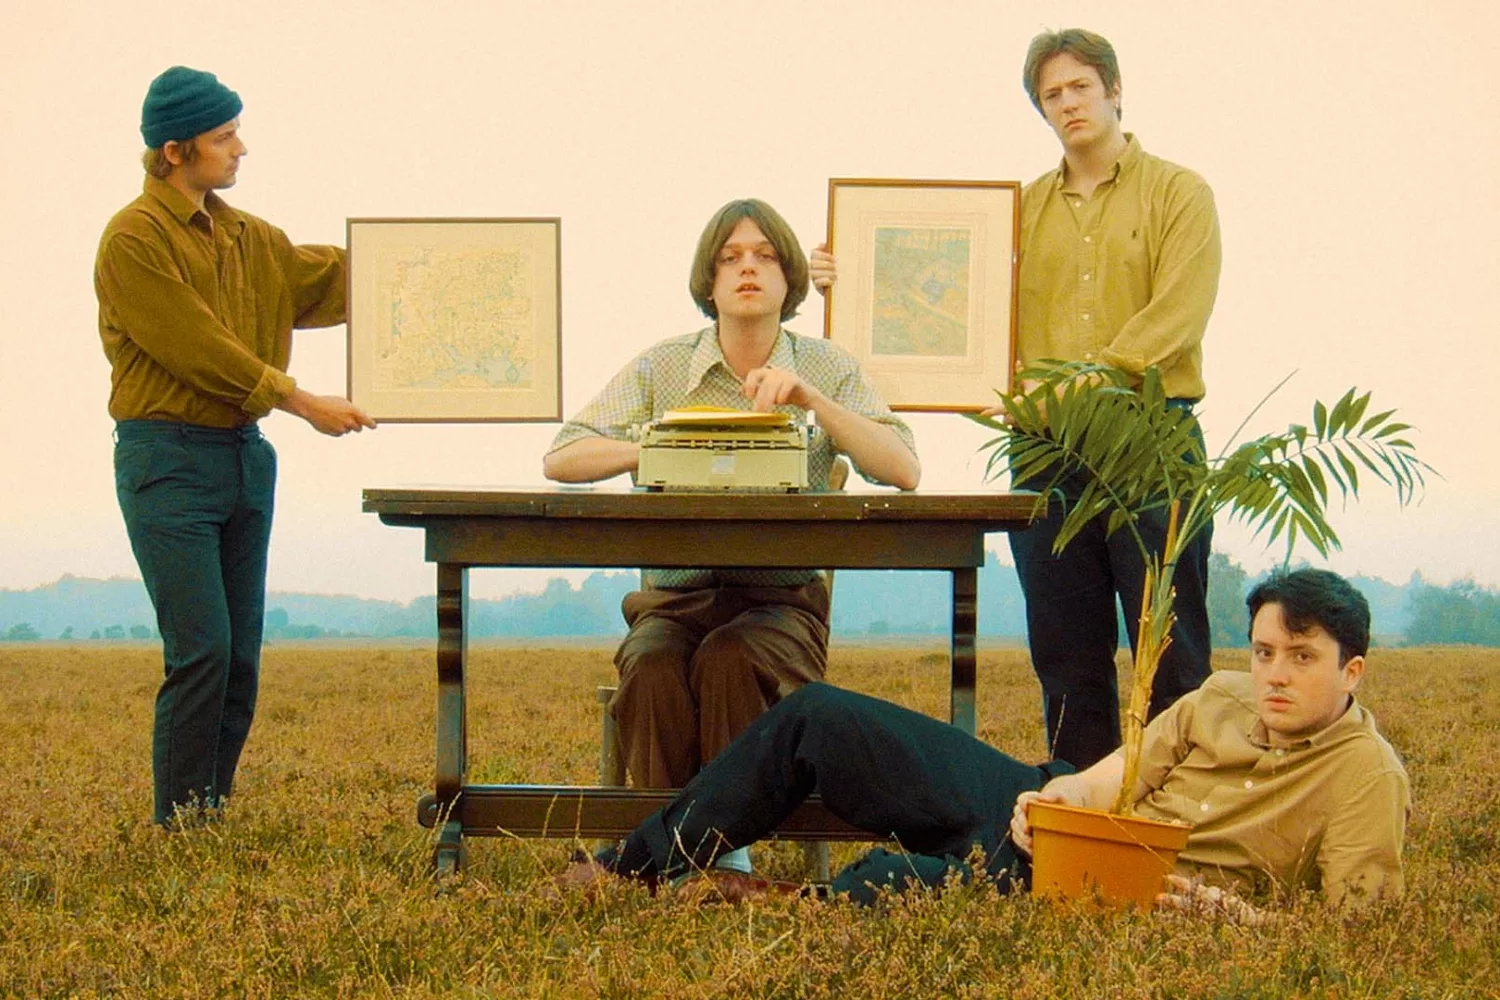 FUR unveil nostalgic, Wes Anderson-indebted video for 'If You Know That I'm Lonely'